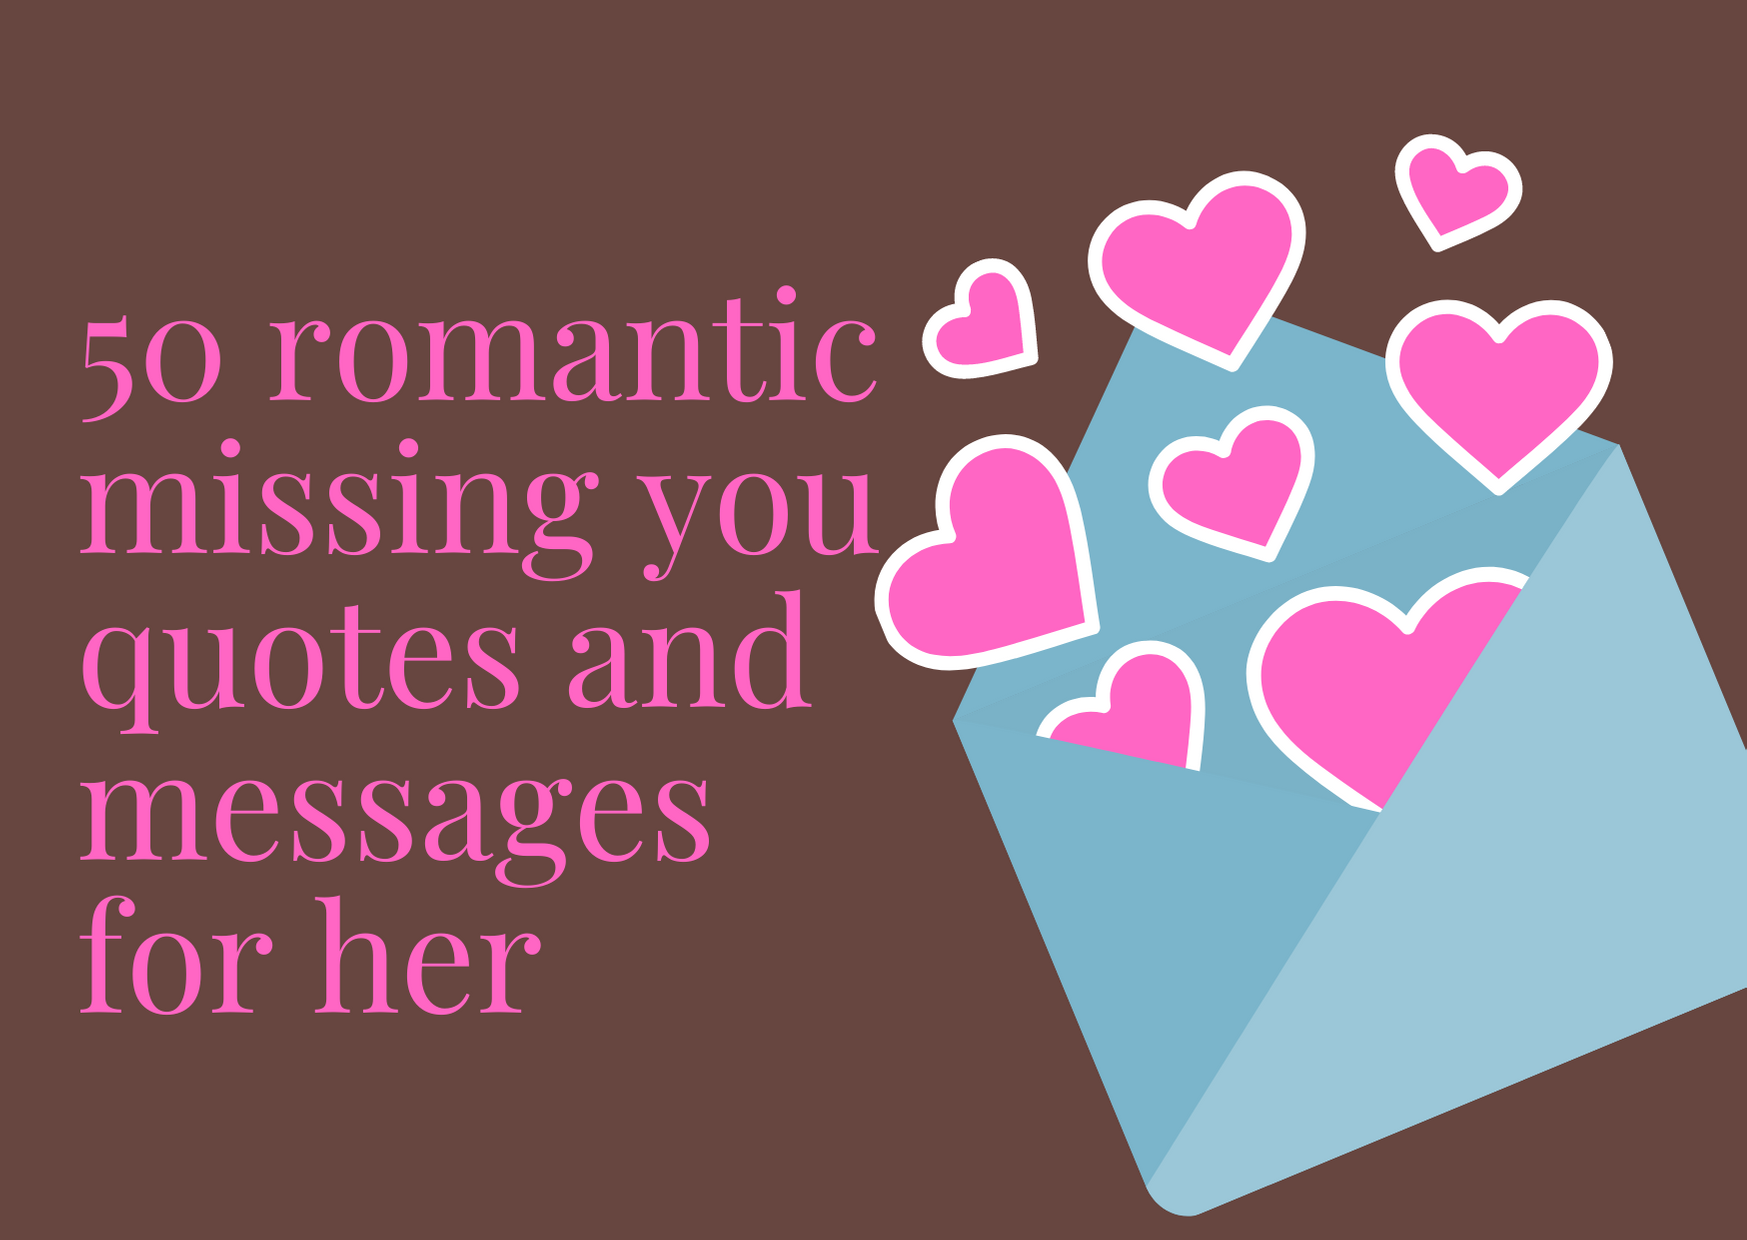 70 romantic love quotes for her from the heart with images. 